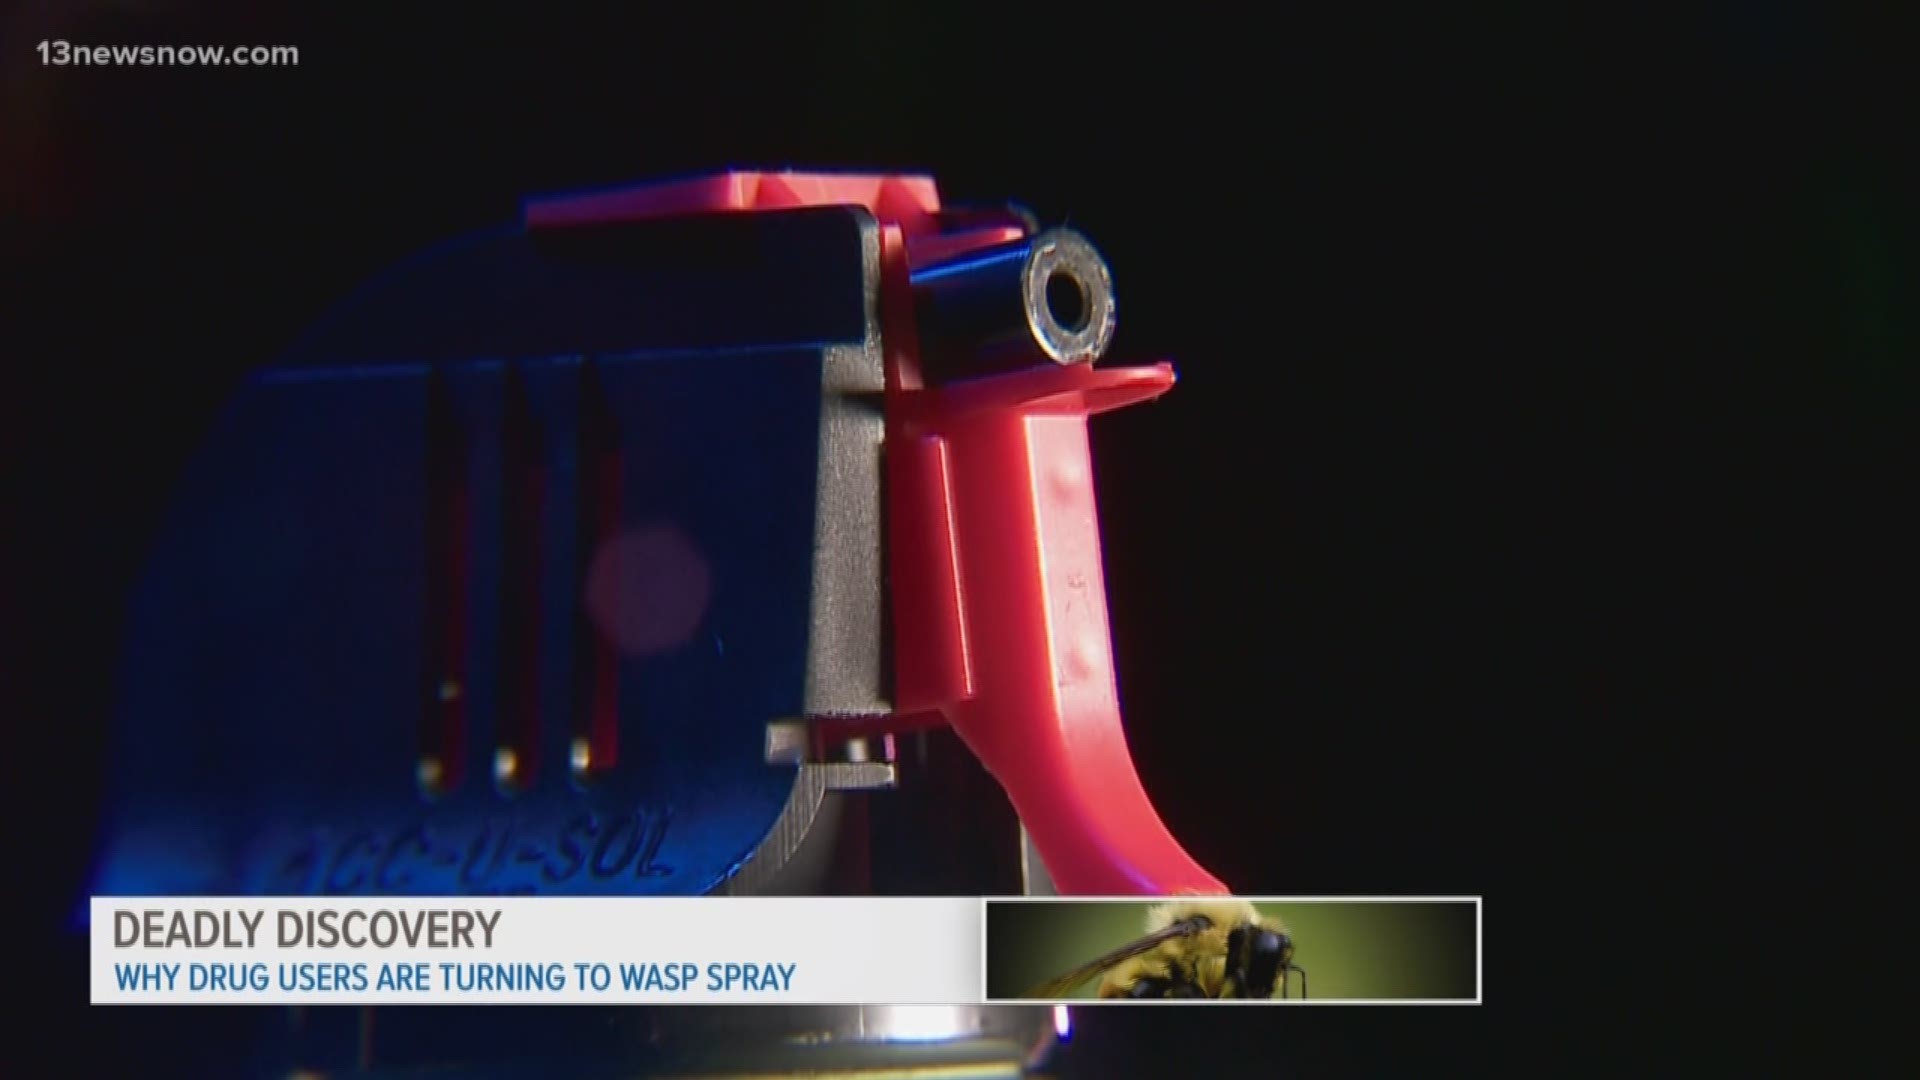 Experts say people are manufacturing their own drugs using insecticide. Nor only is the drug deadly, but it's not clear what the wasp spray can do to the body.